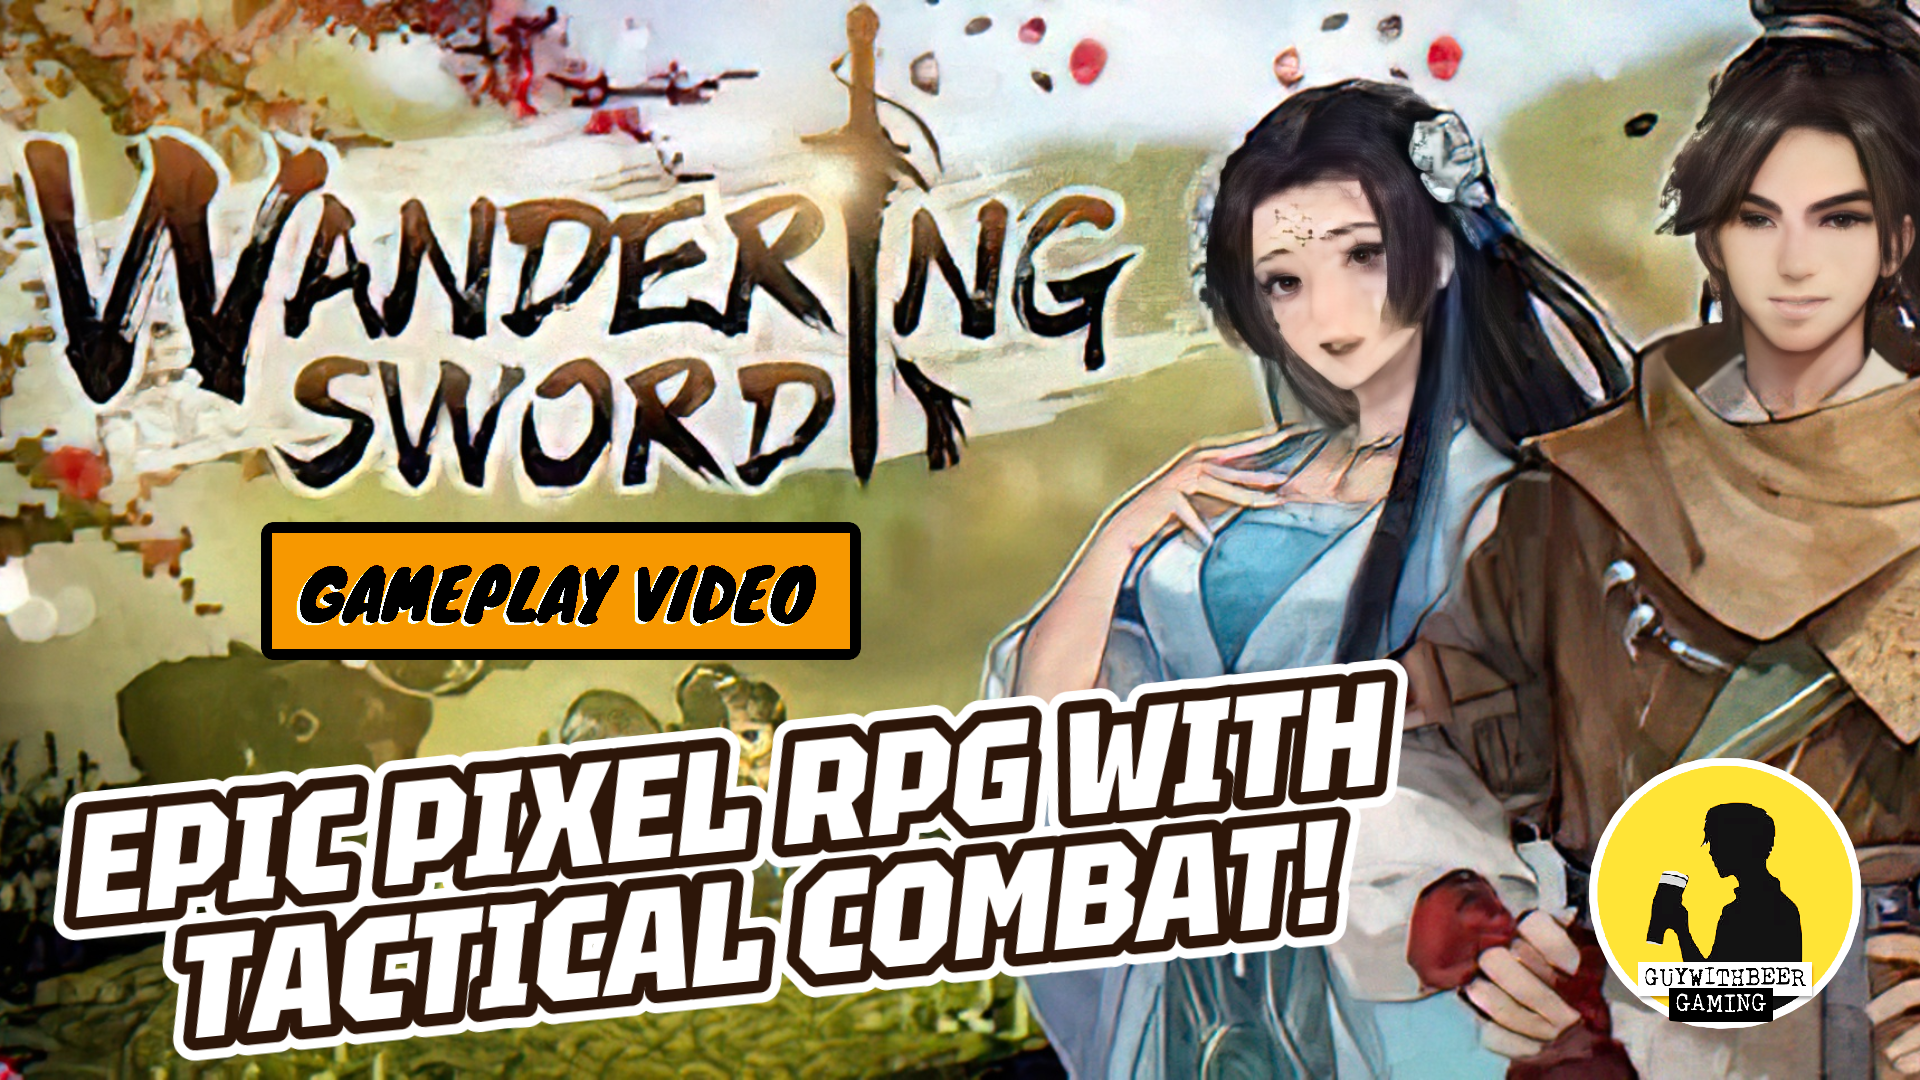 EPIC PIXEL RPG WITH TACTICAL COMBAT | WANDERING SWORD GAMEPLAY #wanderingsword #gameplay #rpg